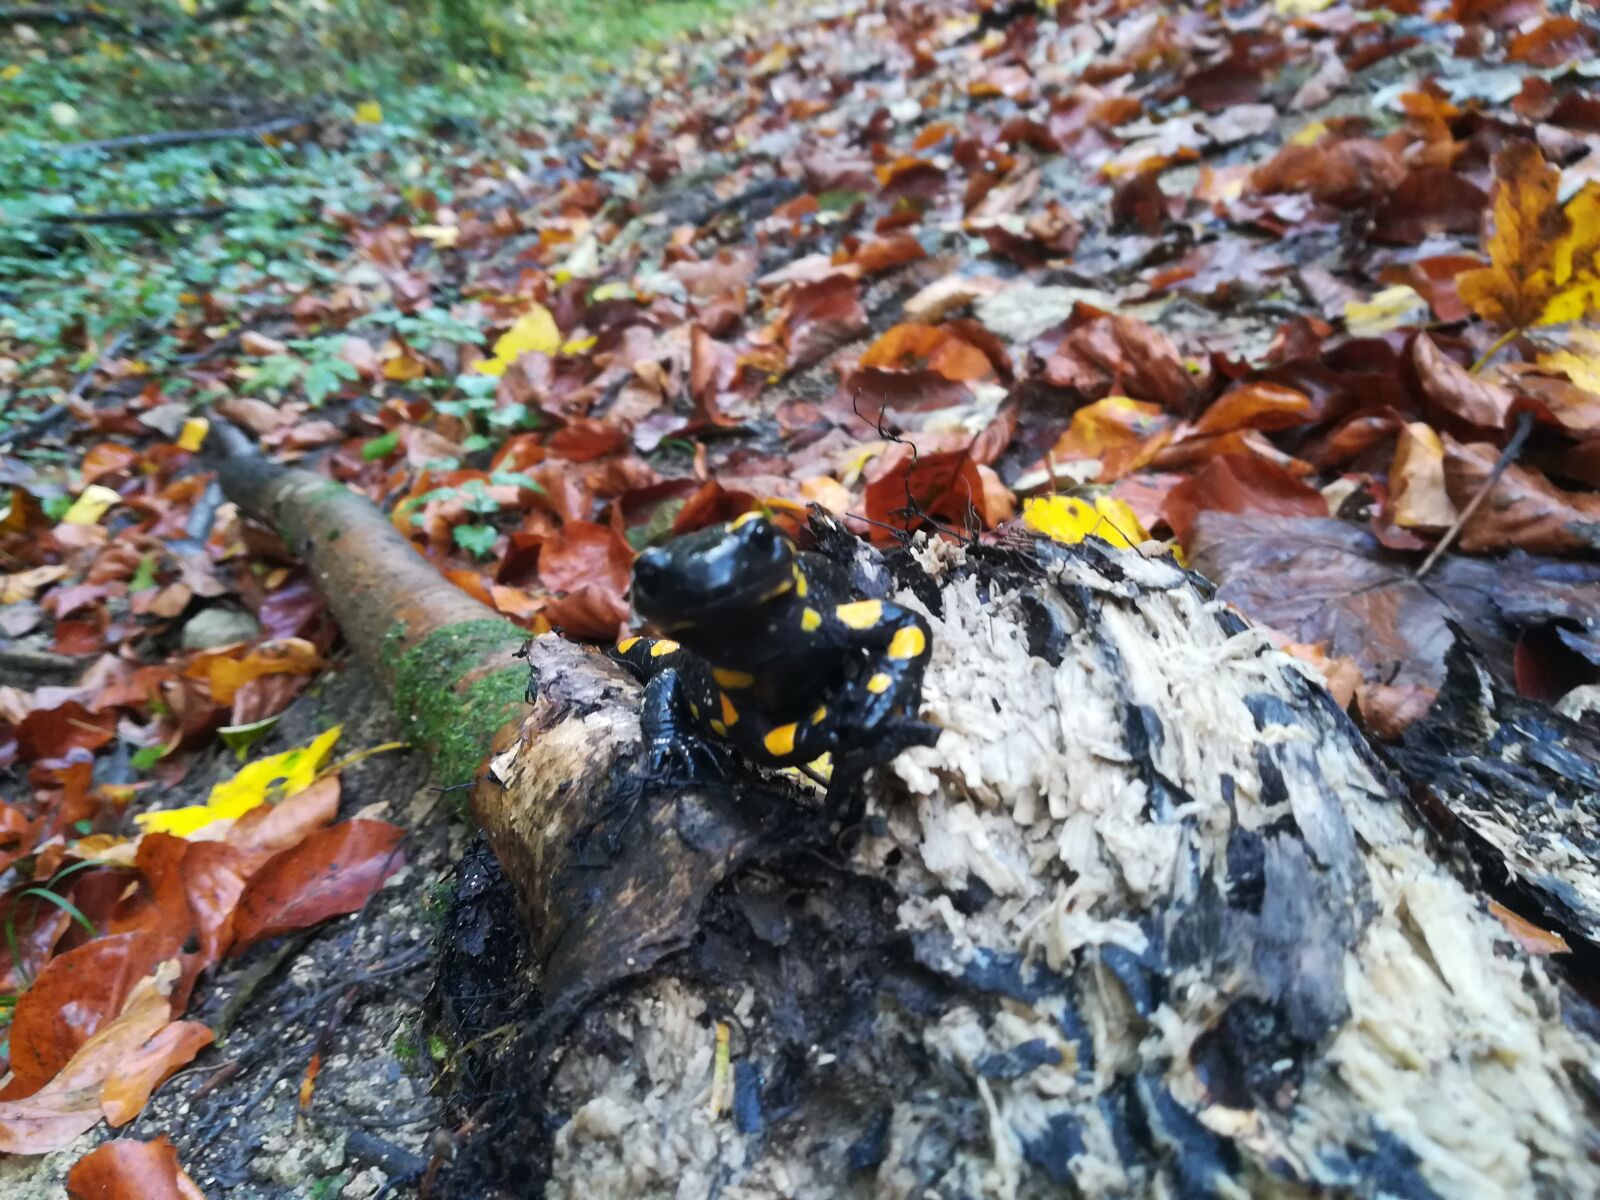 HUAWEI P10 lite sample photo. Fire salamander, forest, animal photography